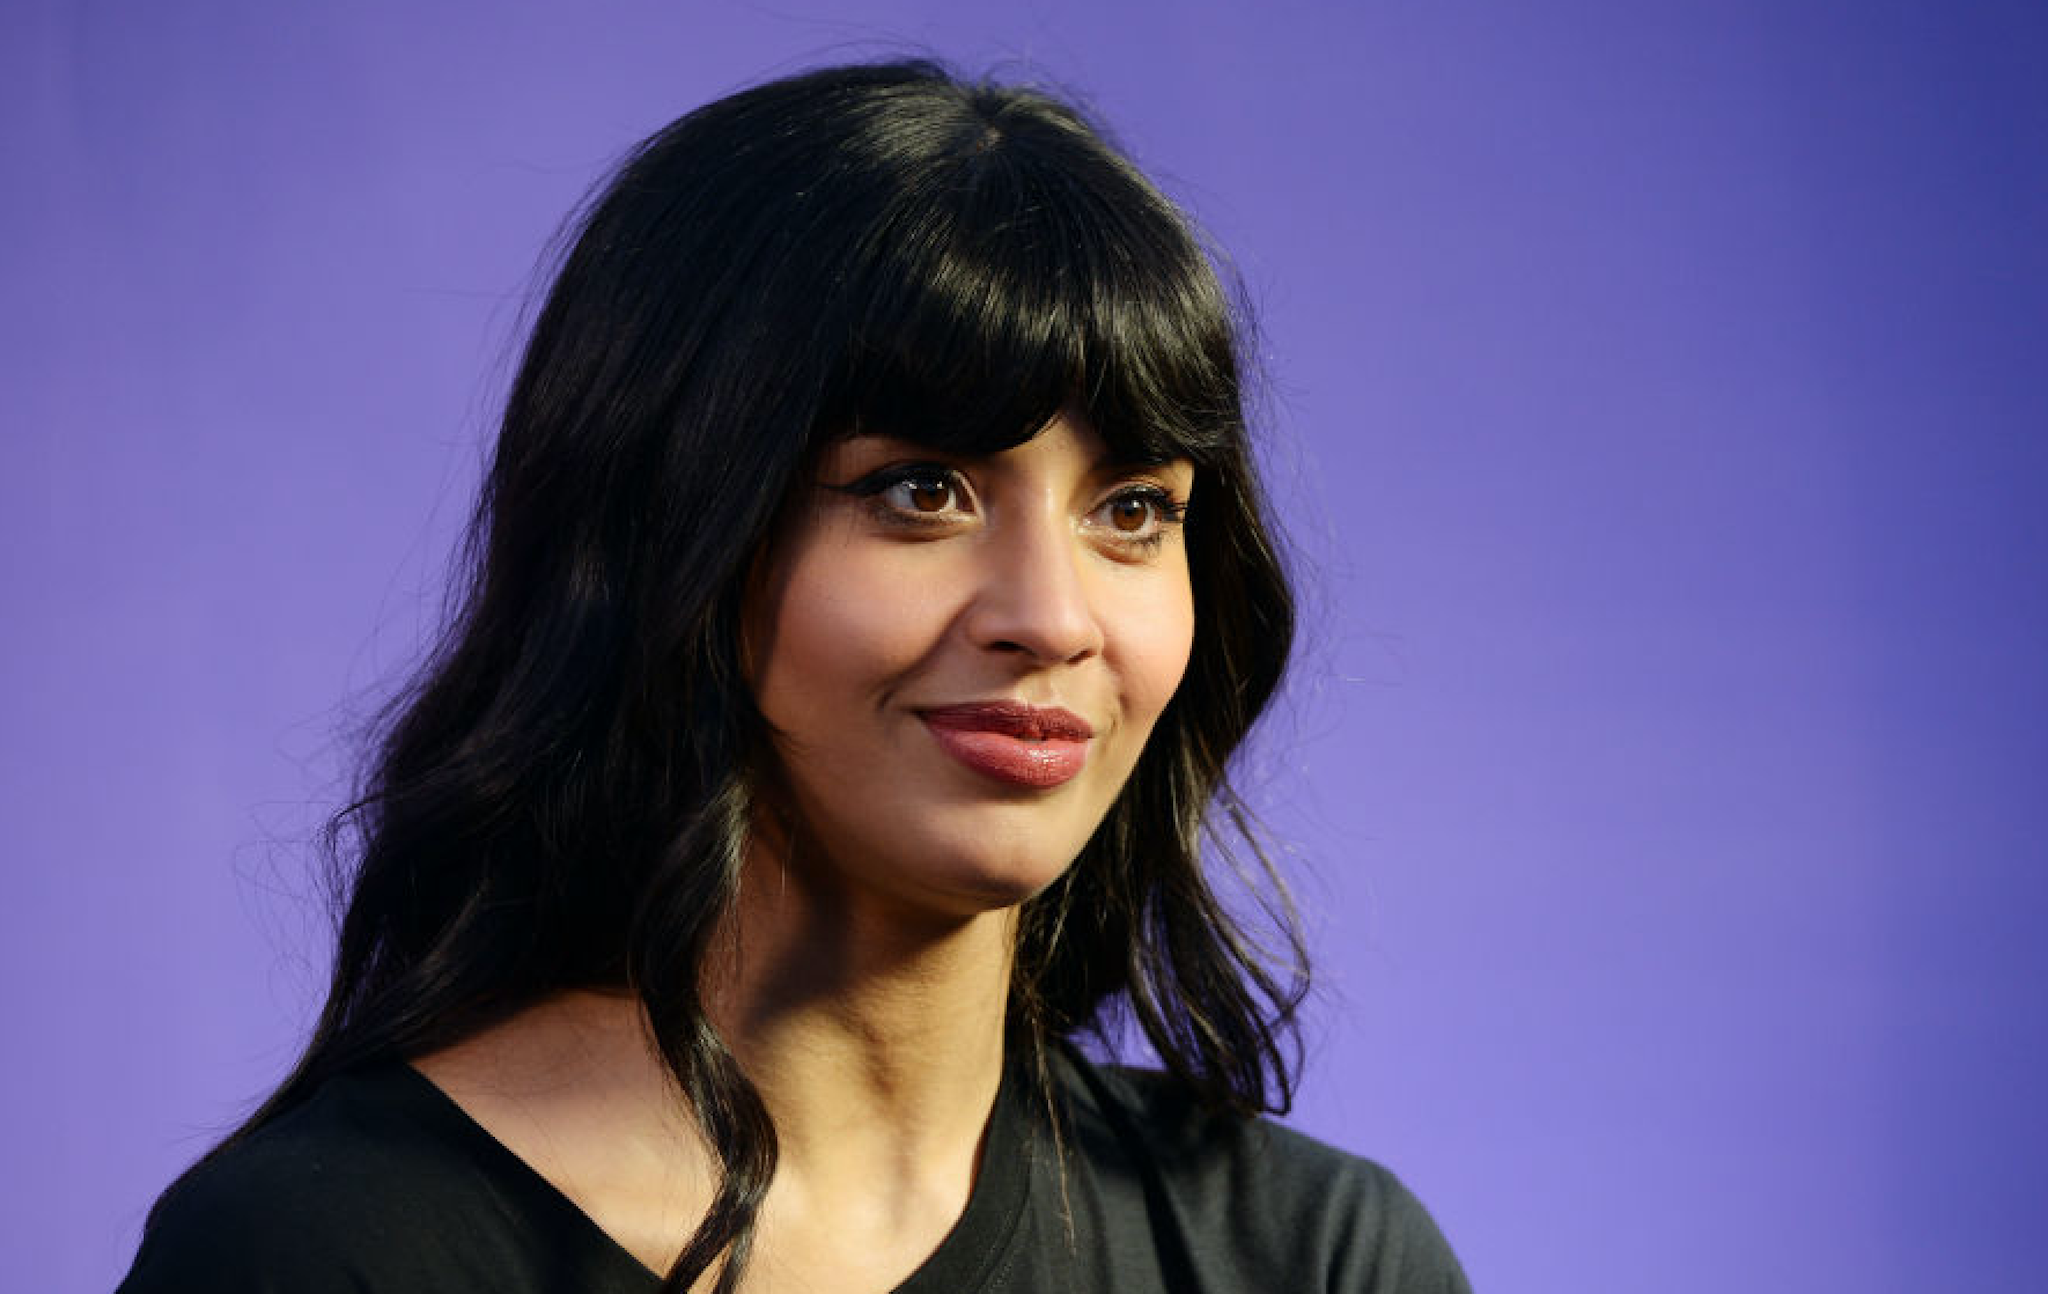 Actress Jameela Jamil attends the Jameela Jamil and Zumba "SELFish" Event at Casita Hollywood on February 04, 2020 in Los Angeles, California.